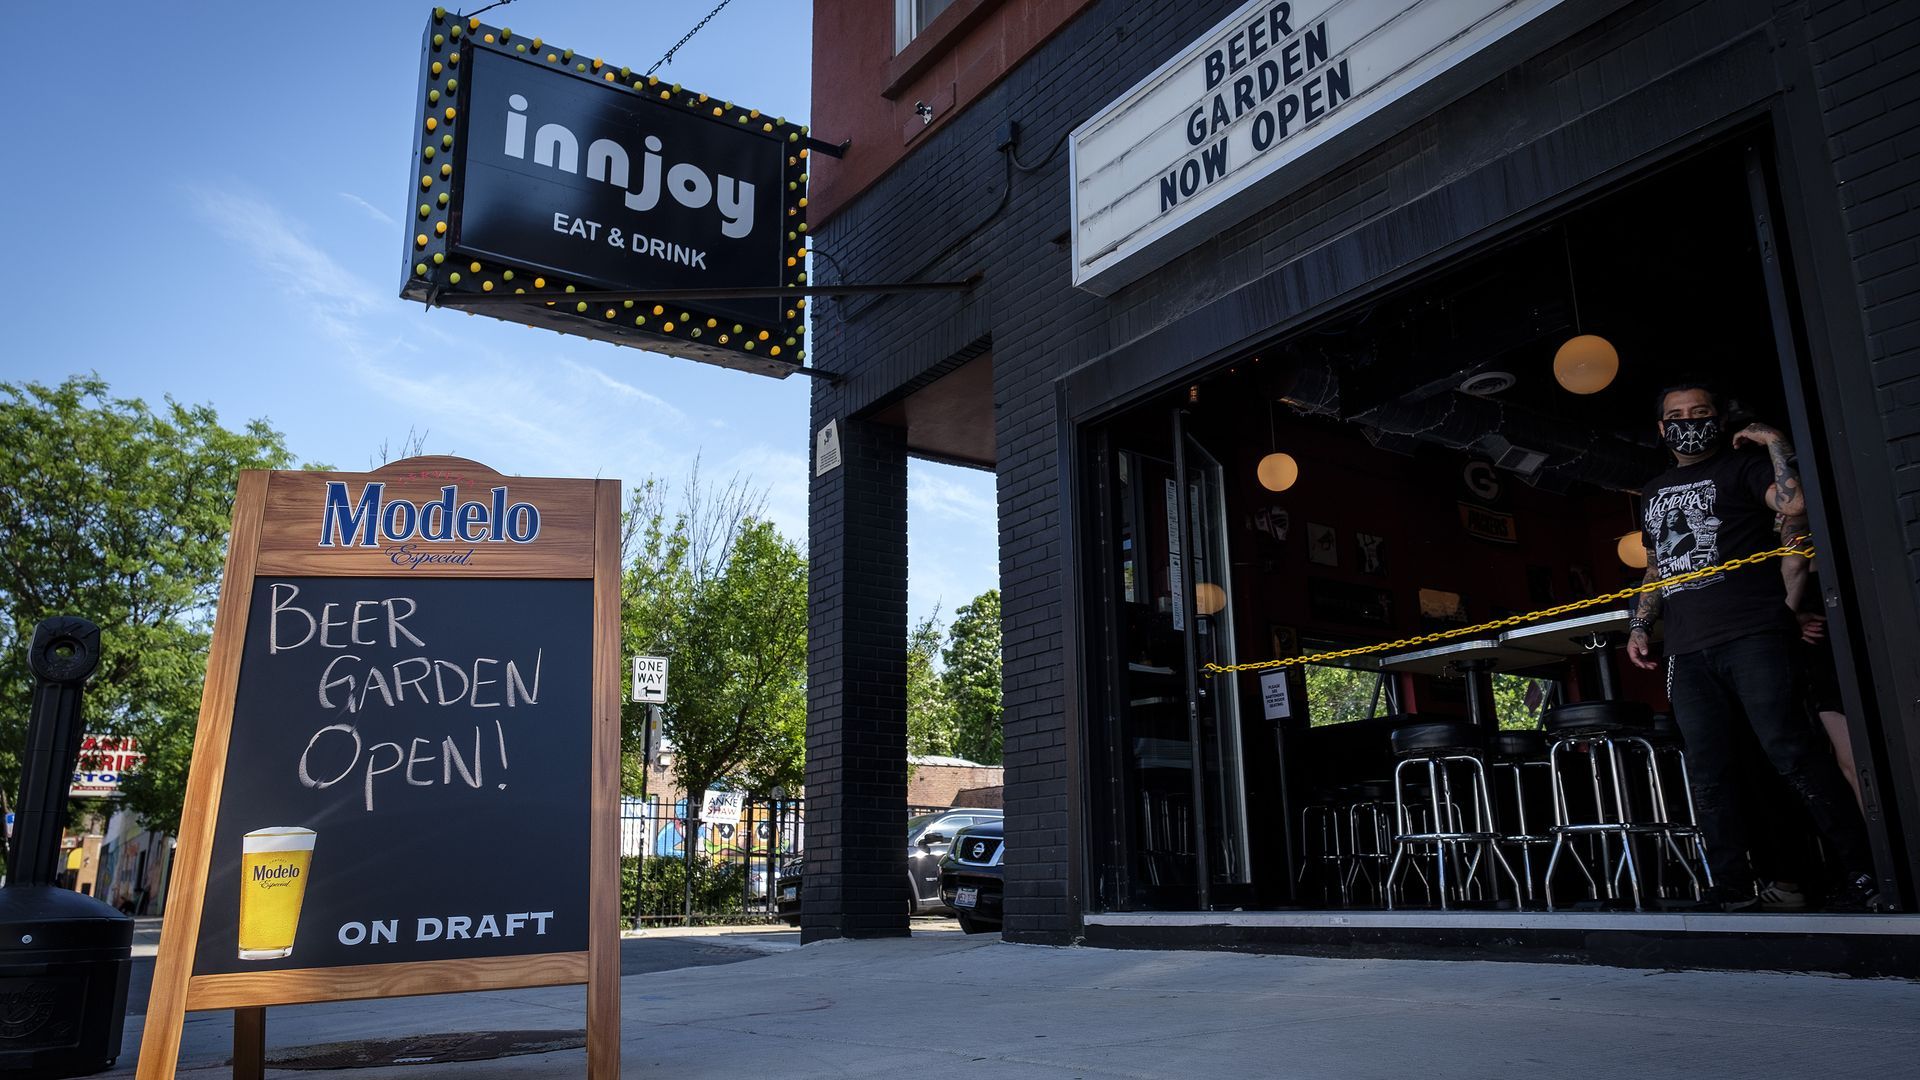 A photo of a sign that says "Beer Garden Open!" in front of innjoy in Chicago.